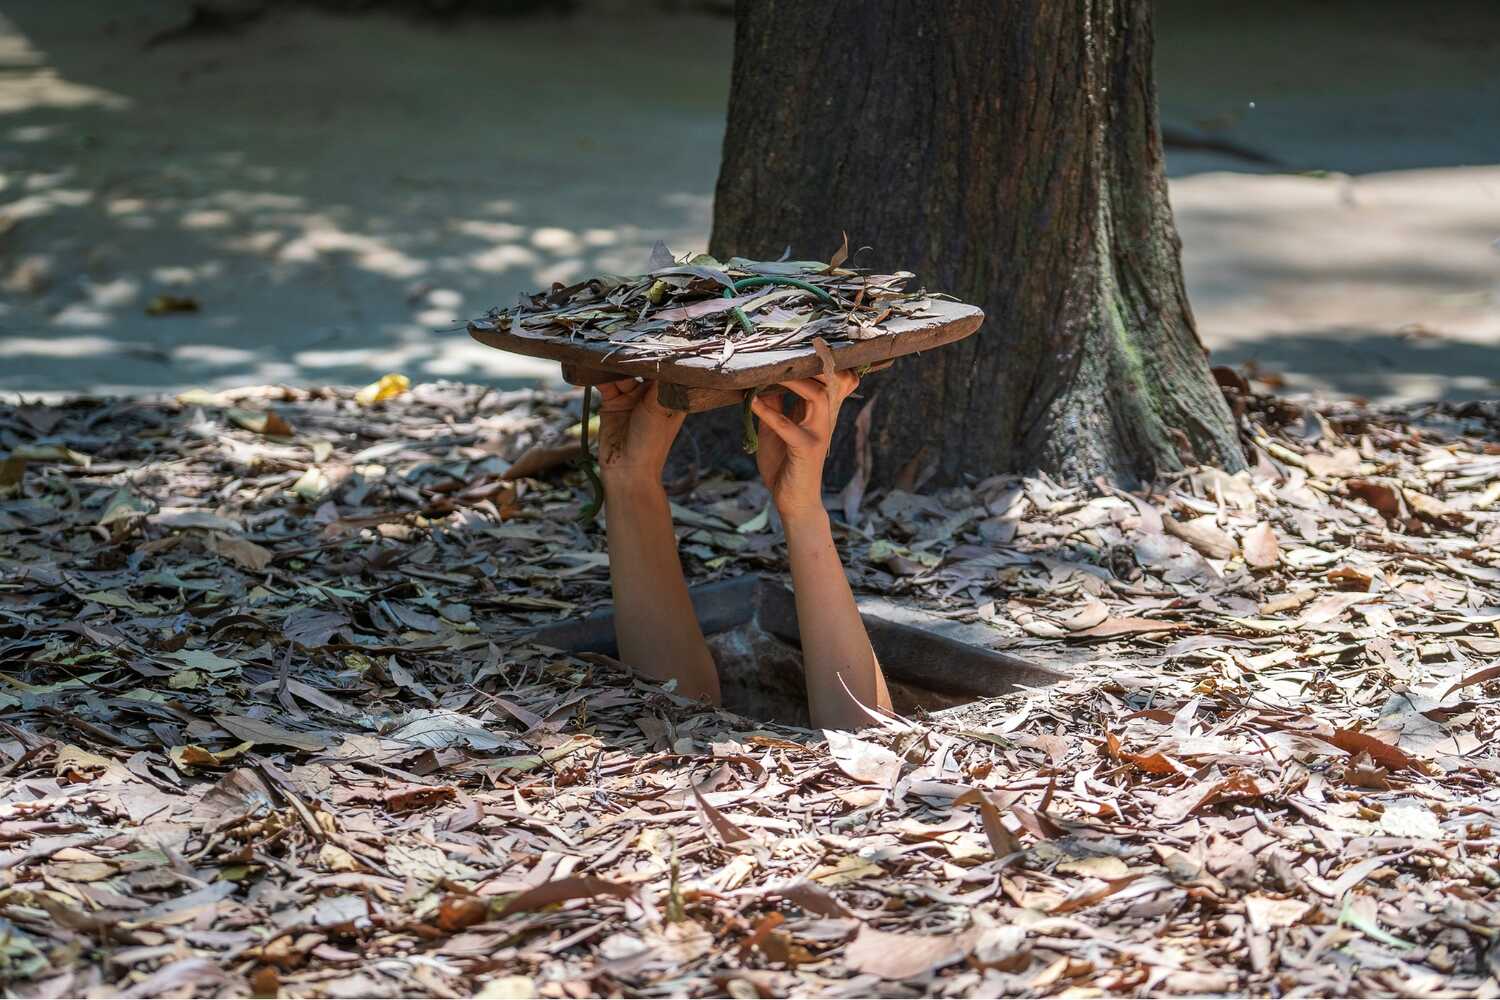 Hands holding a makeshift bird feeder made of wood in a park, surrounded by fallen leaves in the Cu Chi Tunnels in Vietnam.